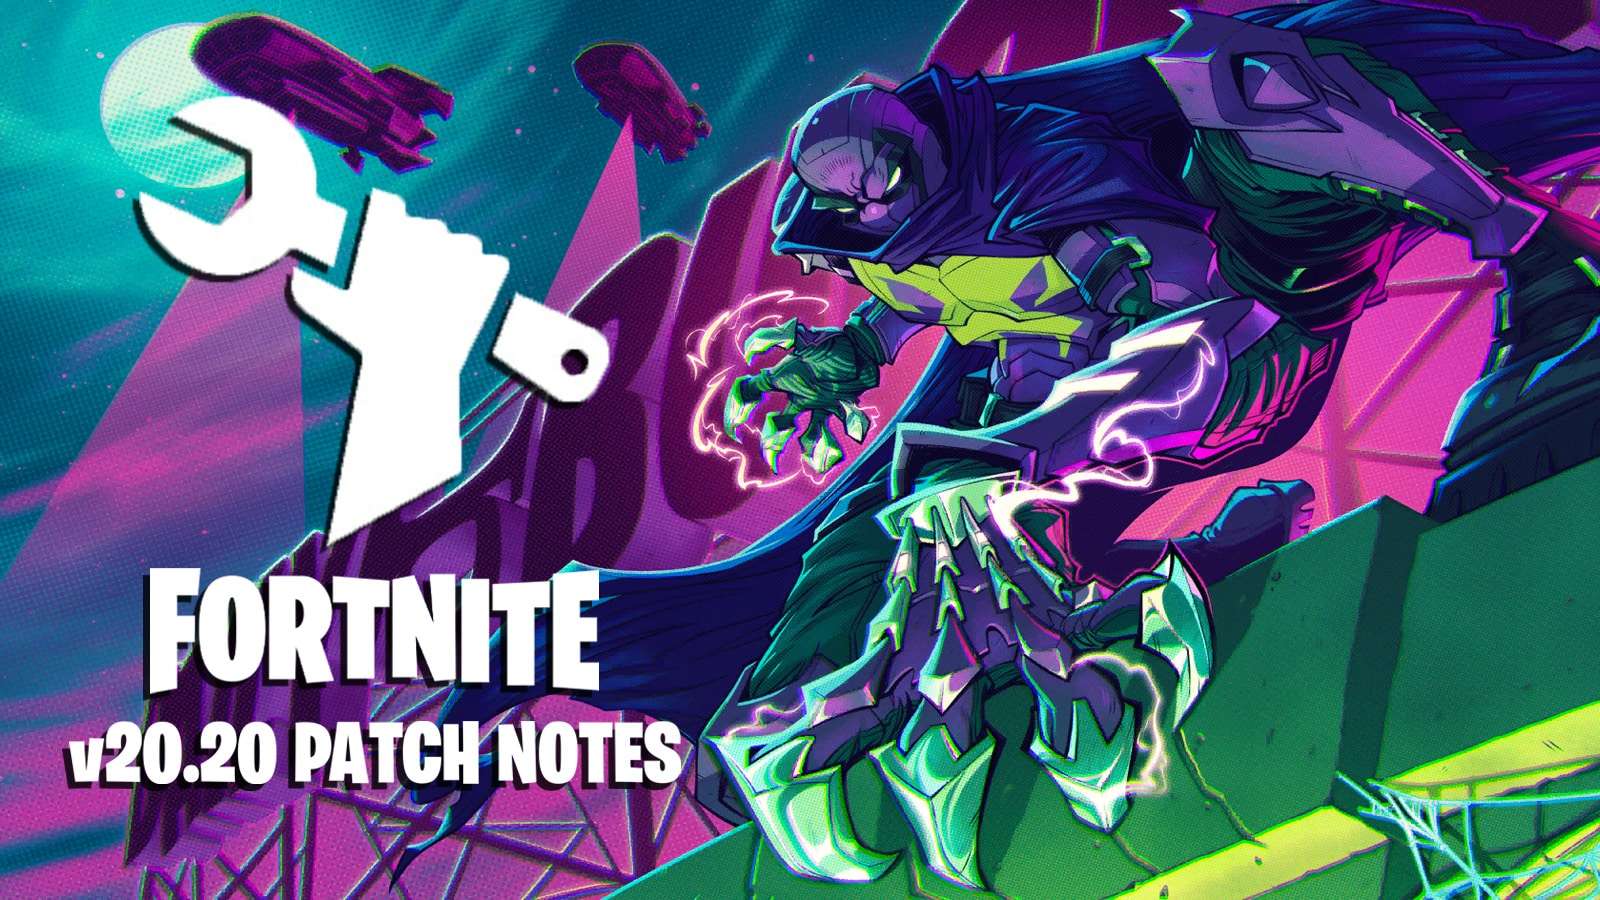 A poster for the Fortnite update 20.20 patch notes